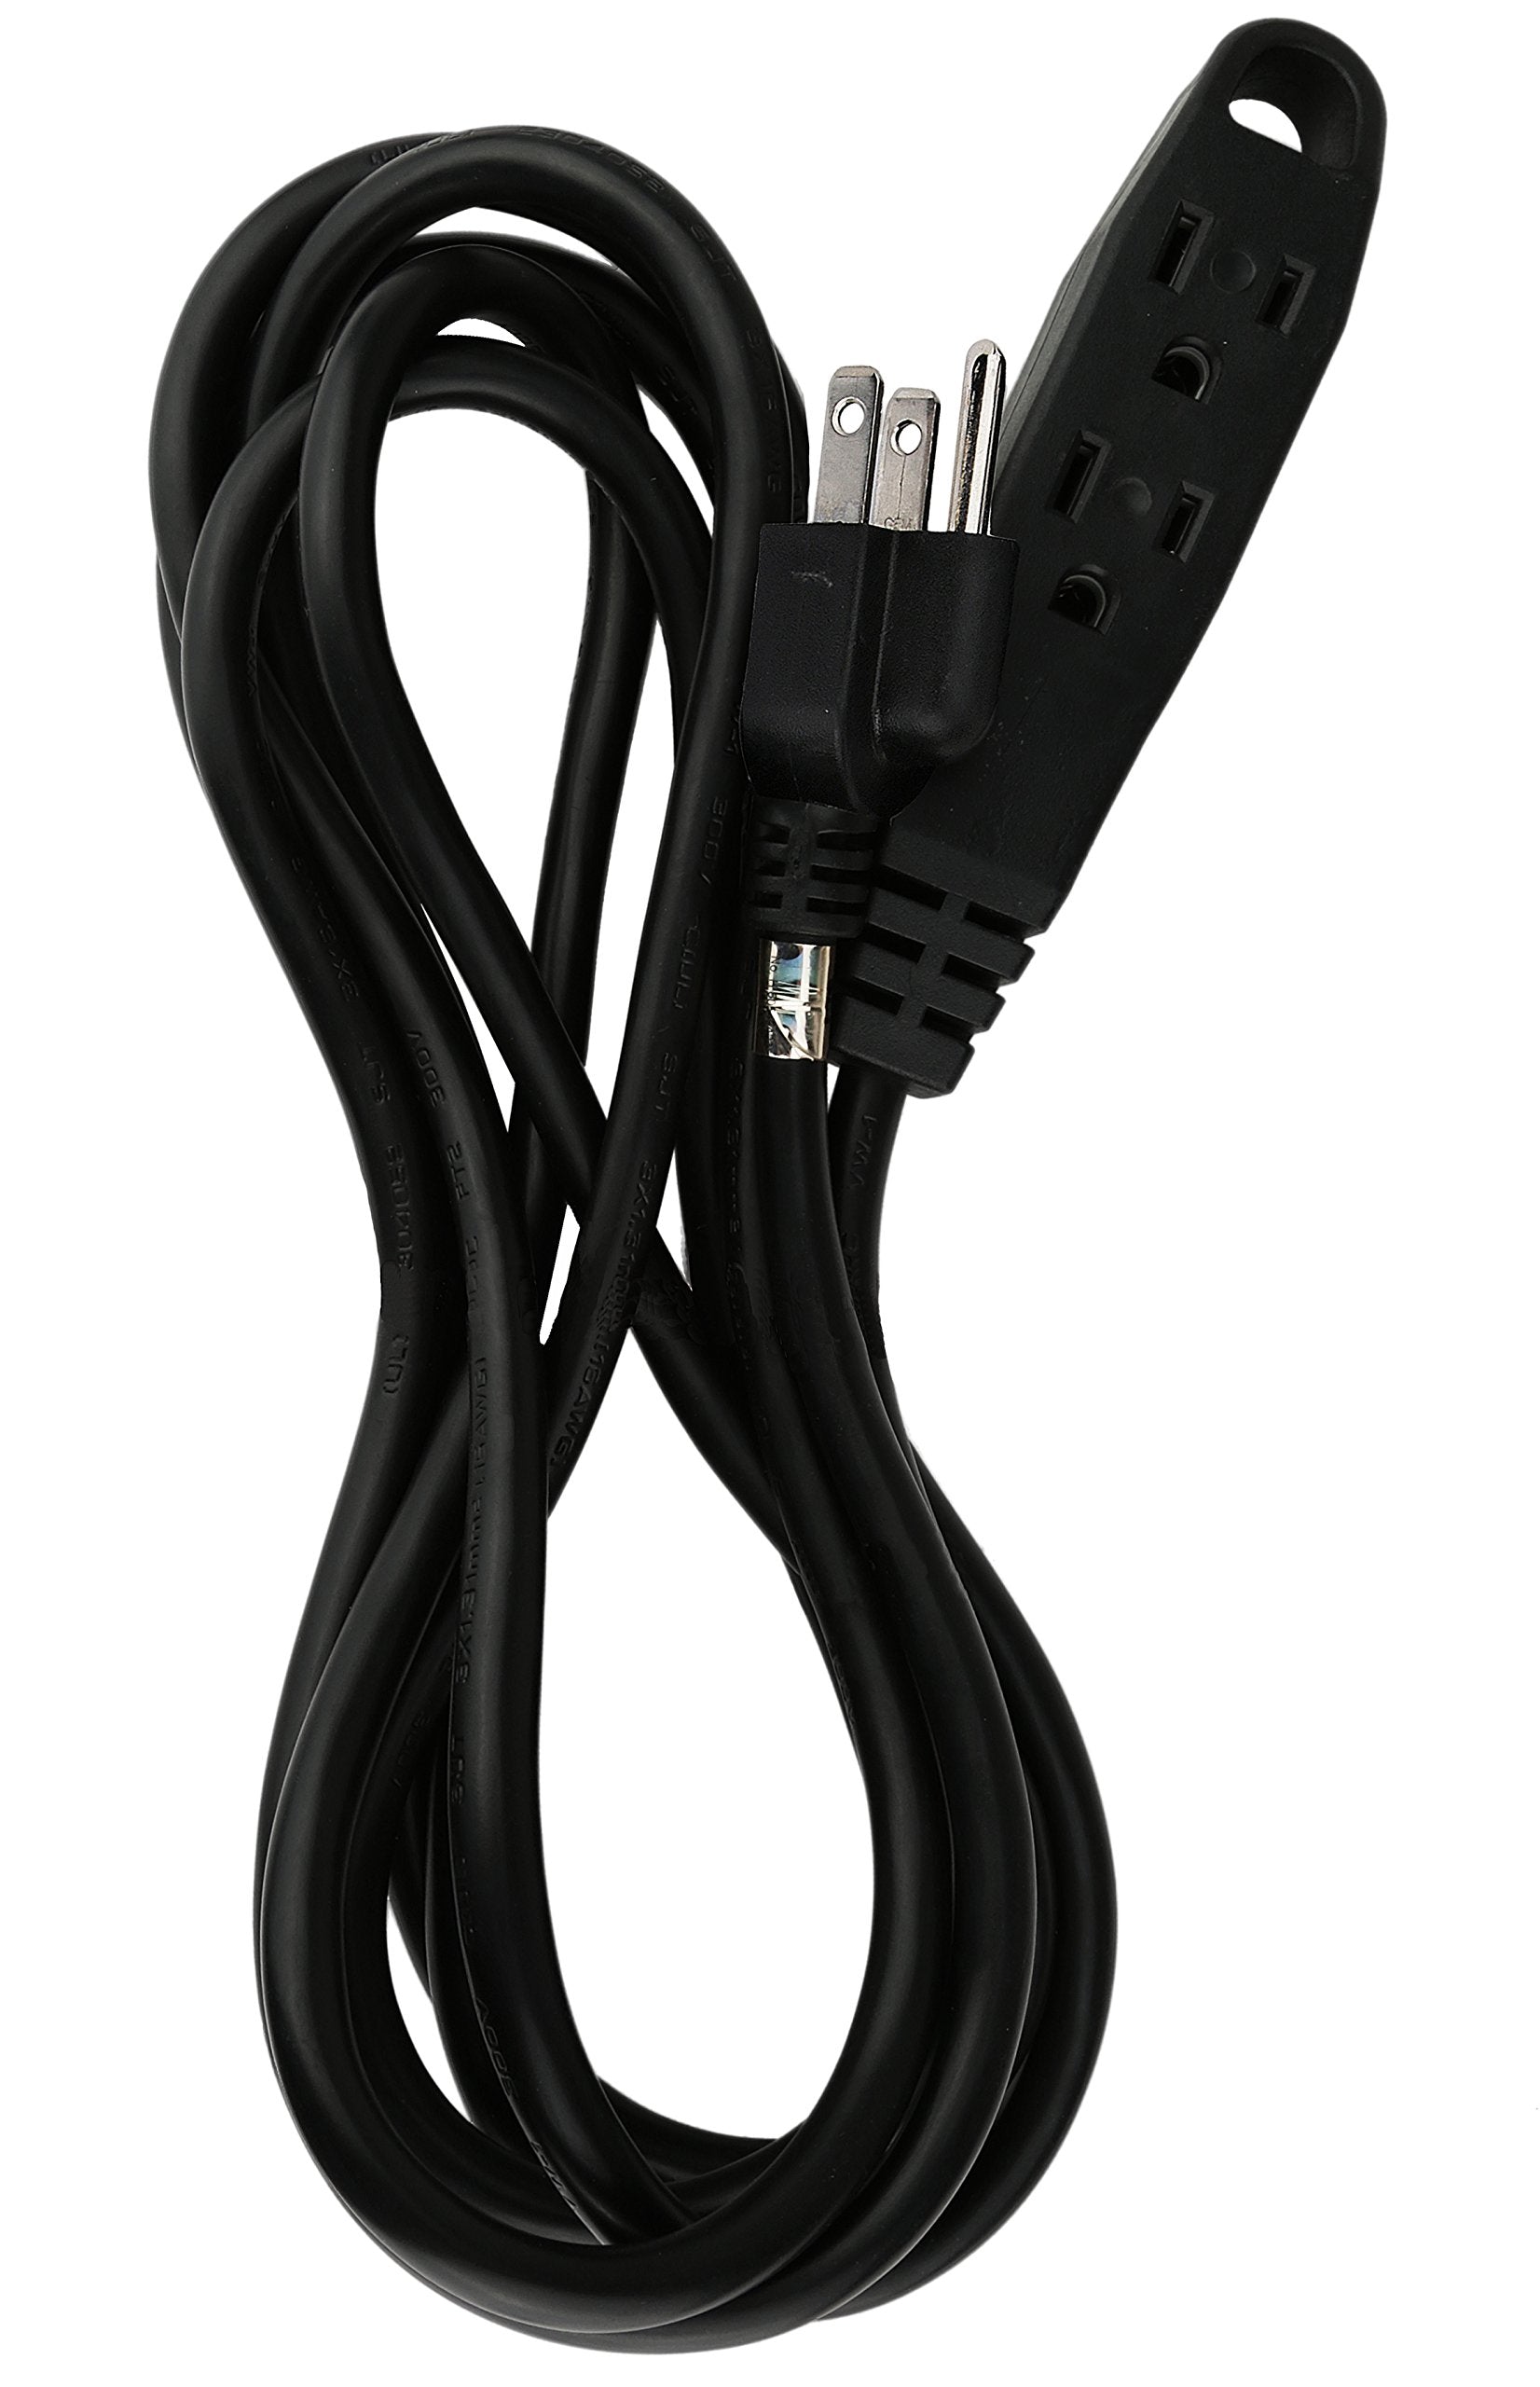 BindMaster Extension Cord/Wire Power Cable, Indoor/Outdoor, 16/3 3 Outlet, 20 Feet, UL Listed, Black  - Like New